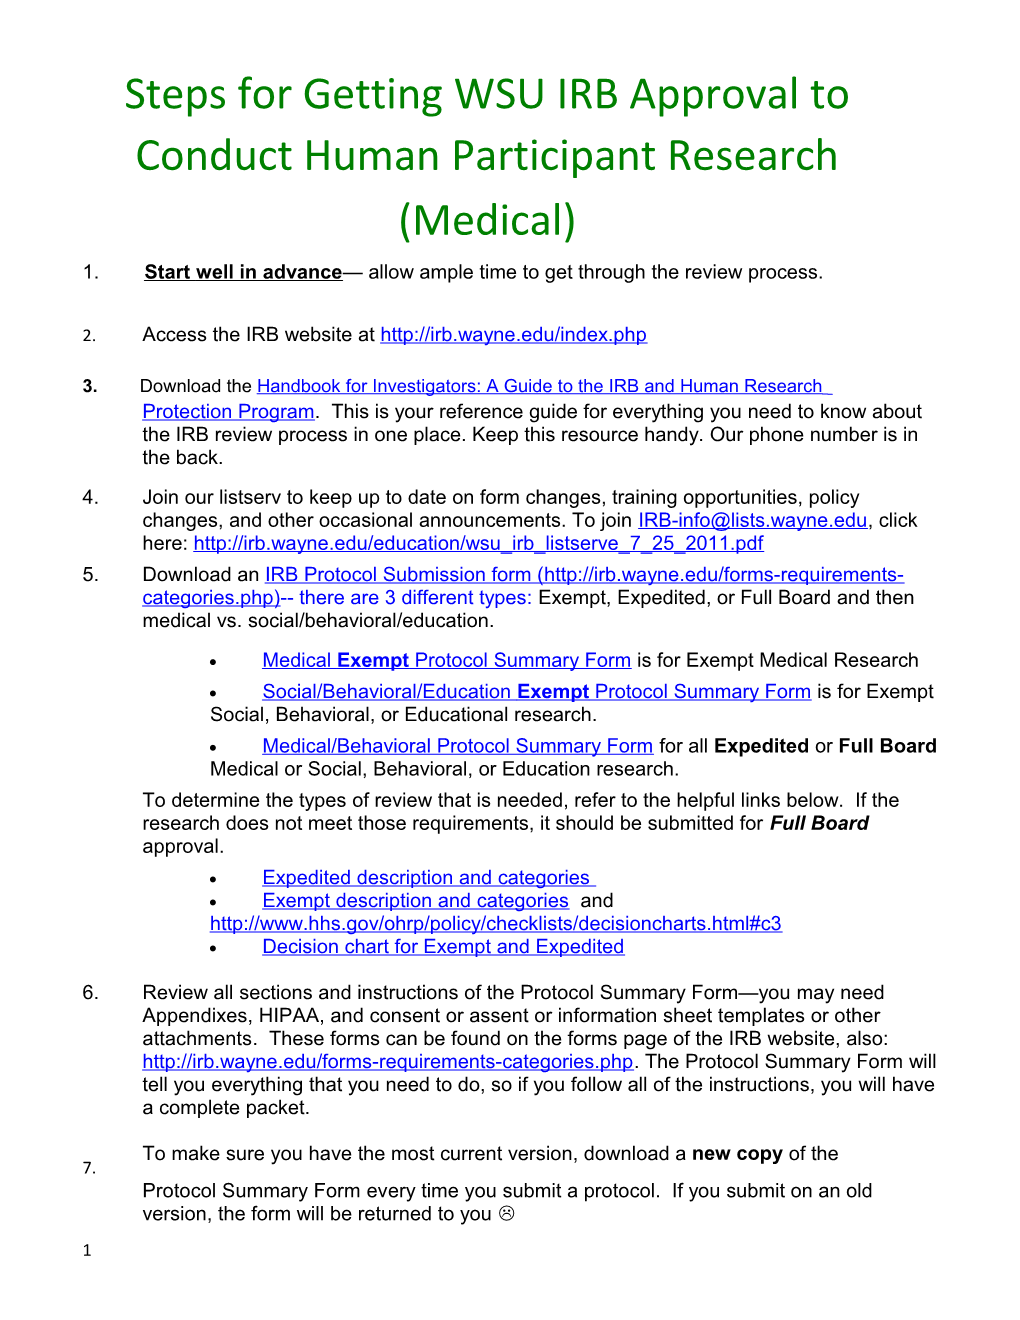 Steps for Getting WSU IRB Approval to Conduct Human Participant Research